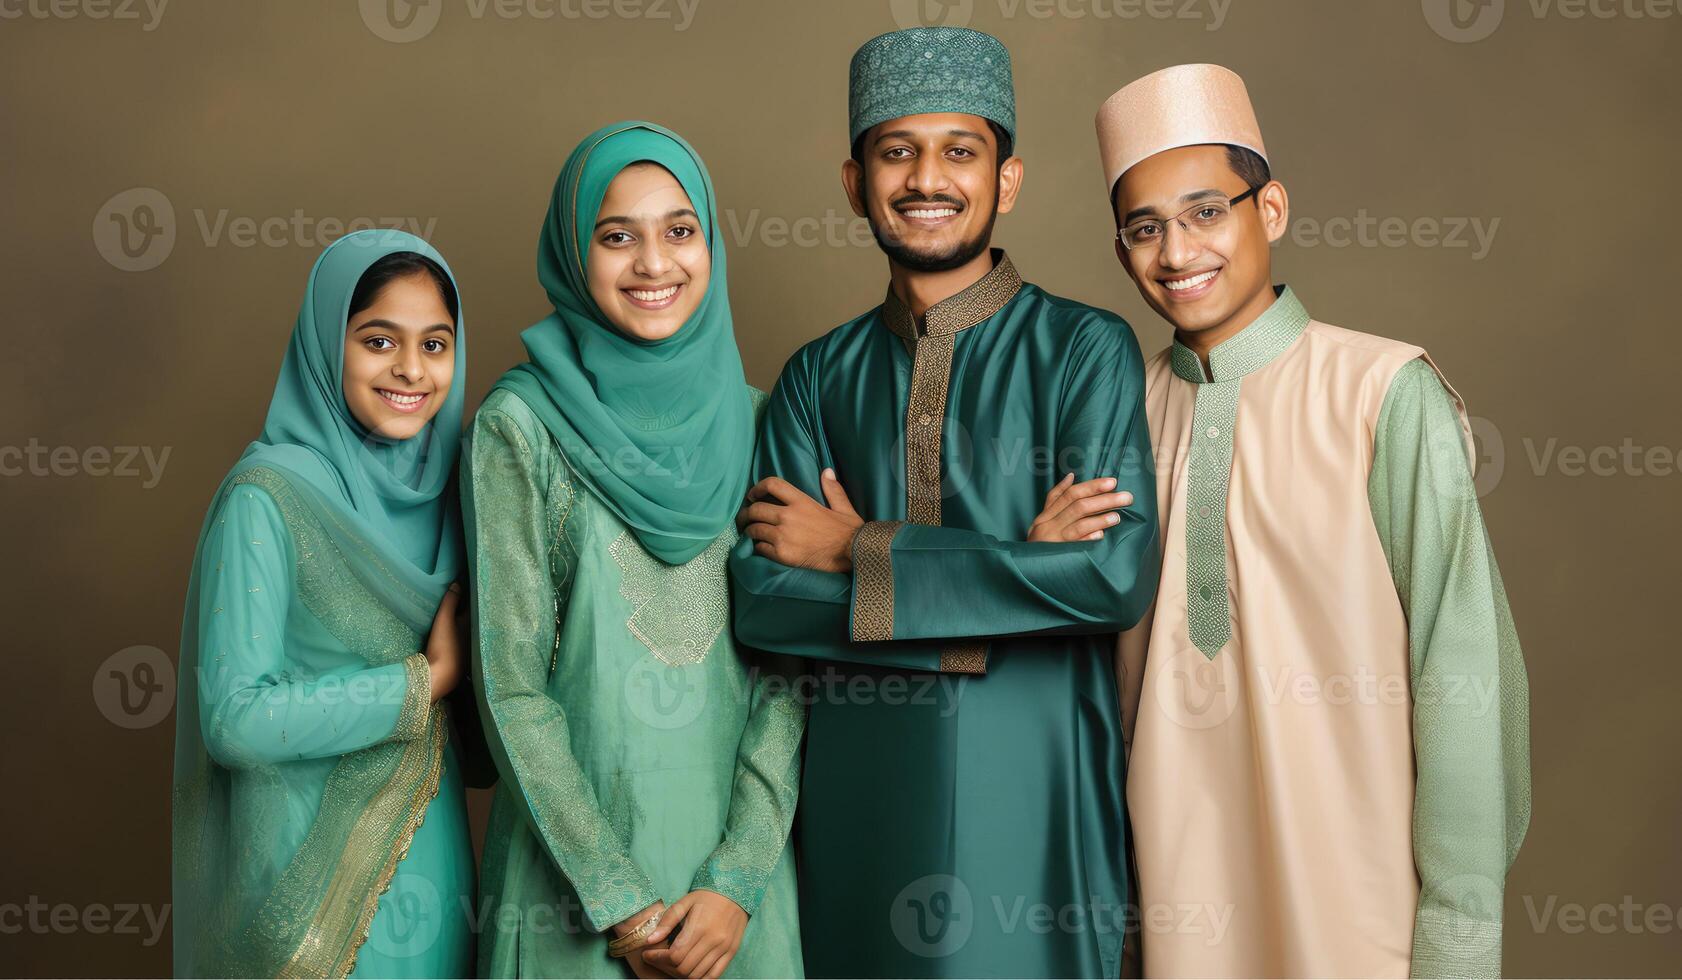 Realistic Portrait of Muslim Family Wearing Traditional Attire During Eid Celebration, . photo